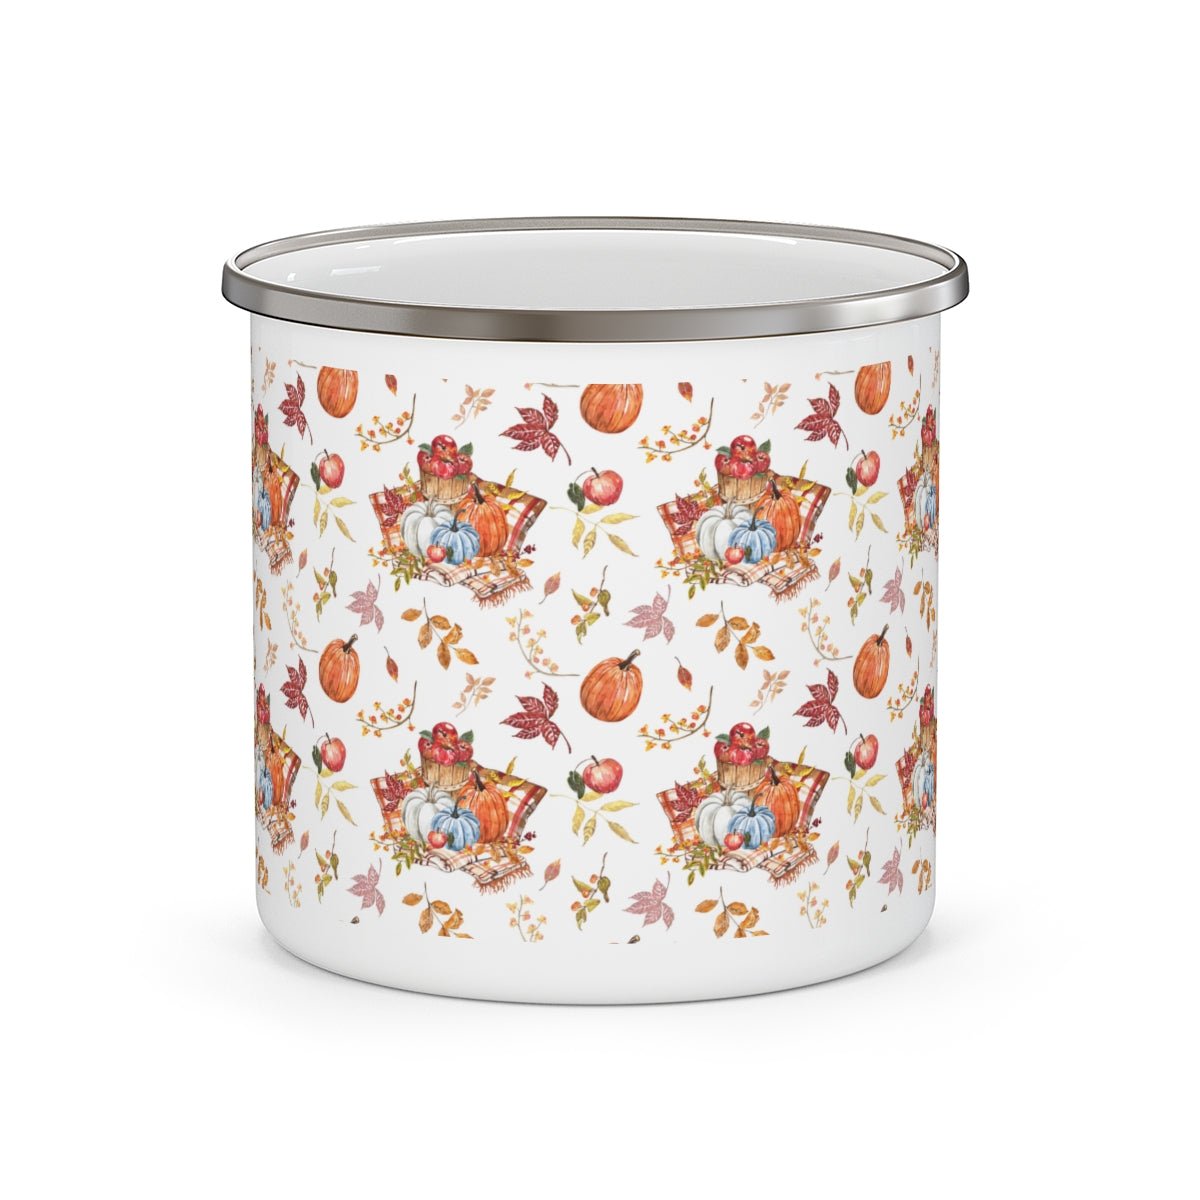 Fall Pumpkins and Apples Stainless Steel Camping Mug - Puffin Lime